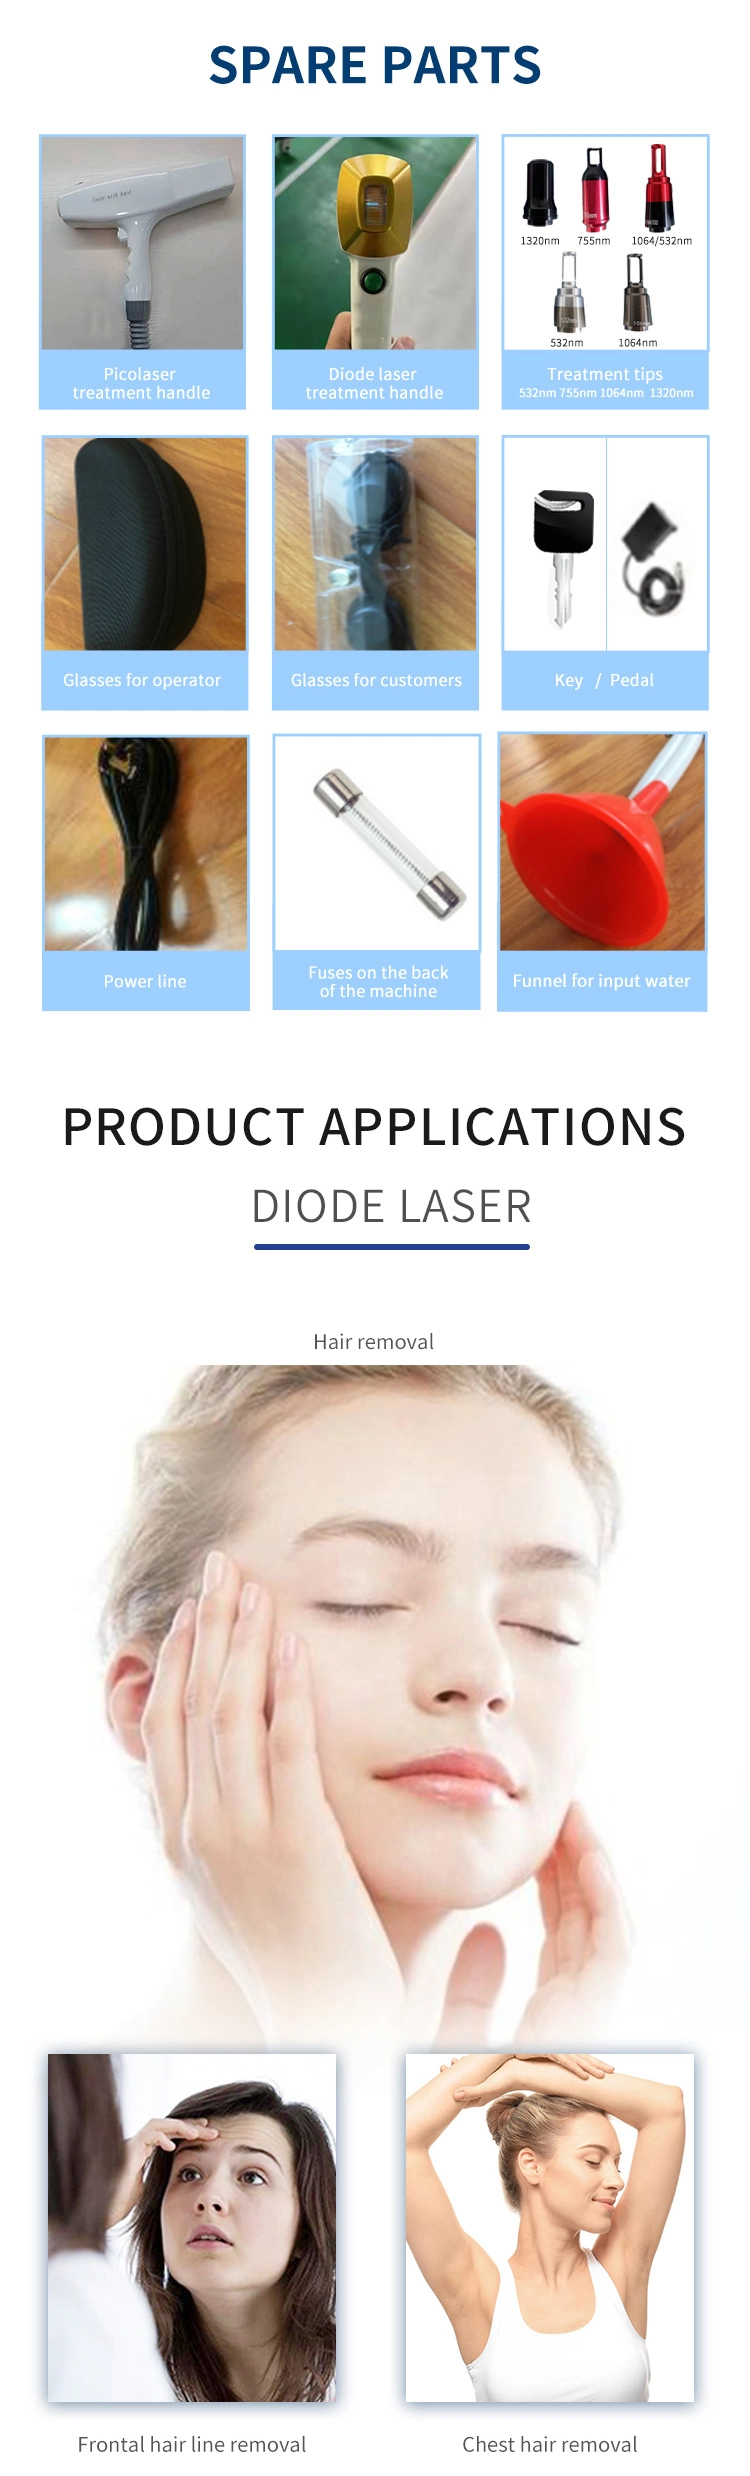 New Arrived 2 in 1 Diode Laser + Pico Laser Permanent Hair Remover Tattoo Removal Machine